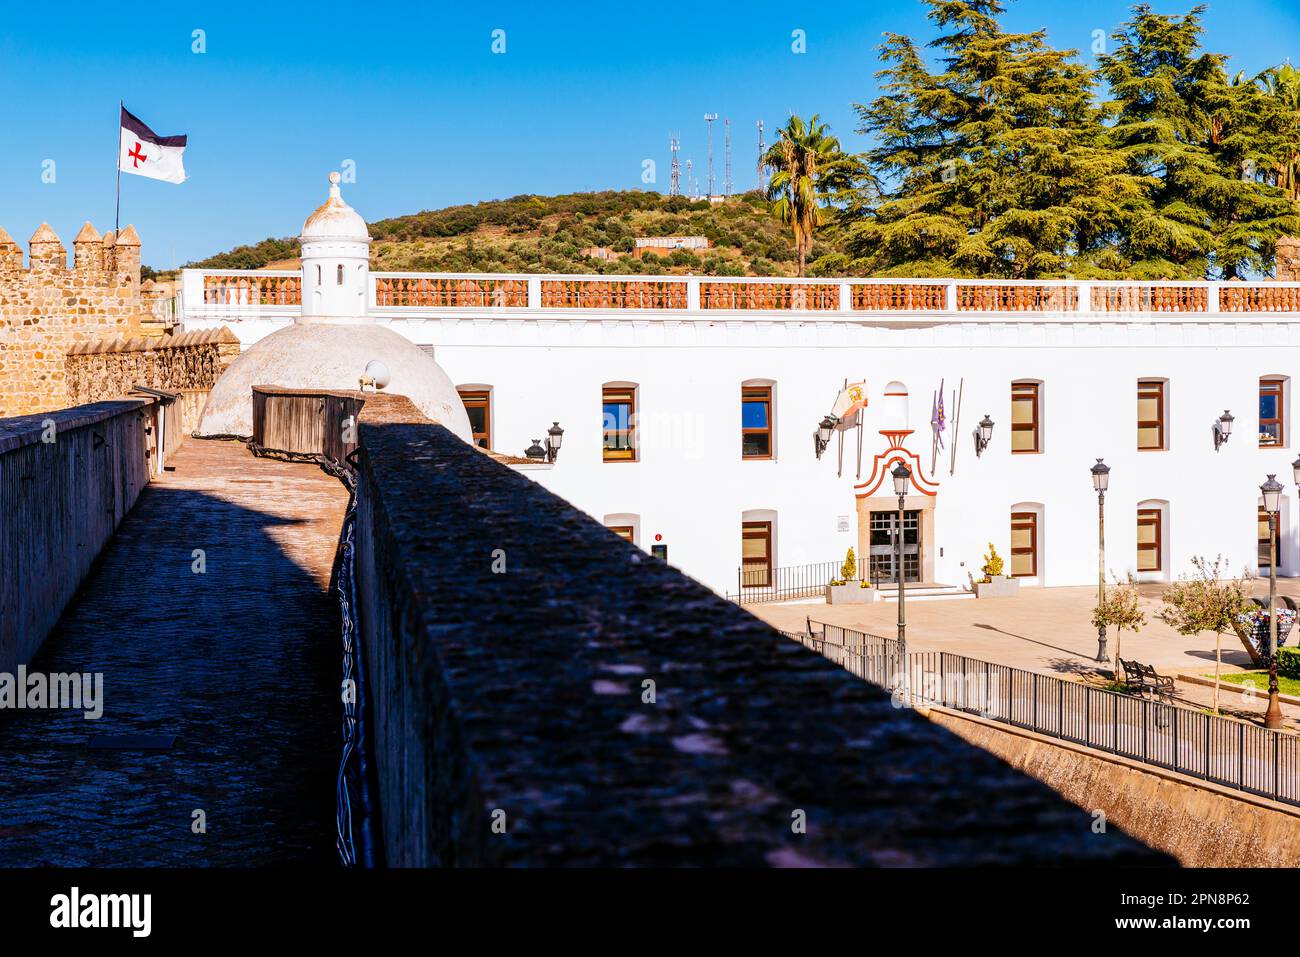 Wall and new town hall in the courtyard of the castle. Jerez de los Caballeros, Badajoz, Extremadura, Spain, Europe Stock Photo